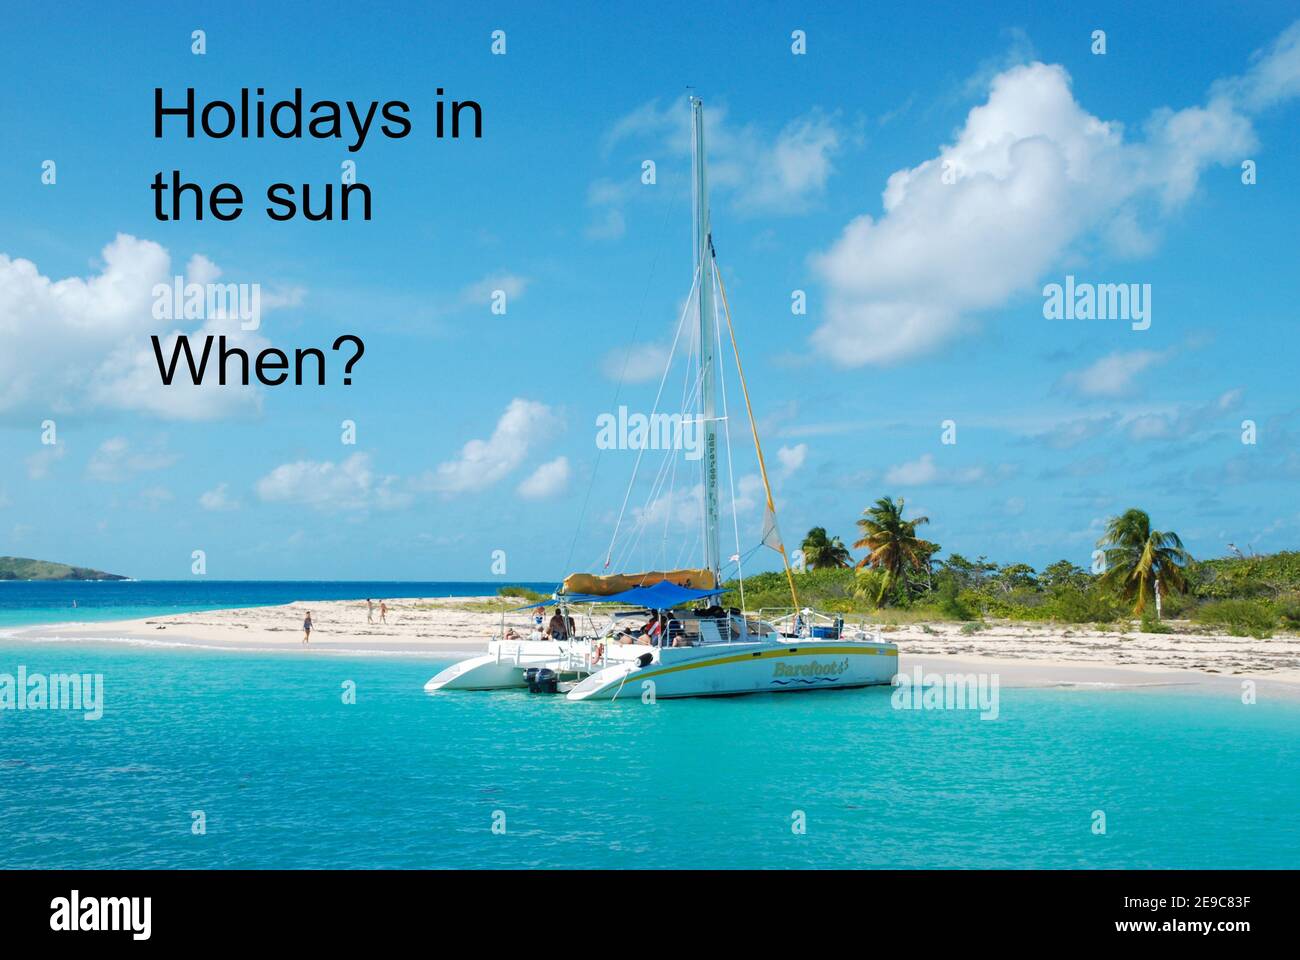 Concept image. When will holidays in the sun be allowed during the coronavirus covid-19 pandemic lockdown. Tropical island, beach and catamaran. Stock Photo